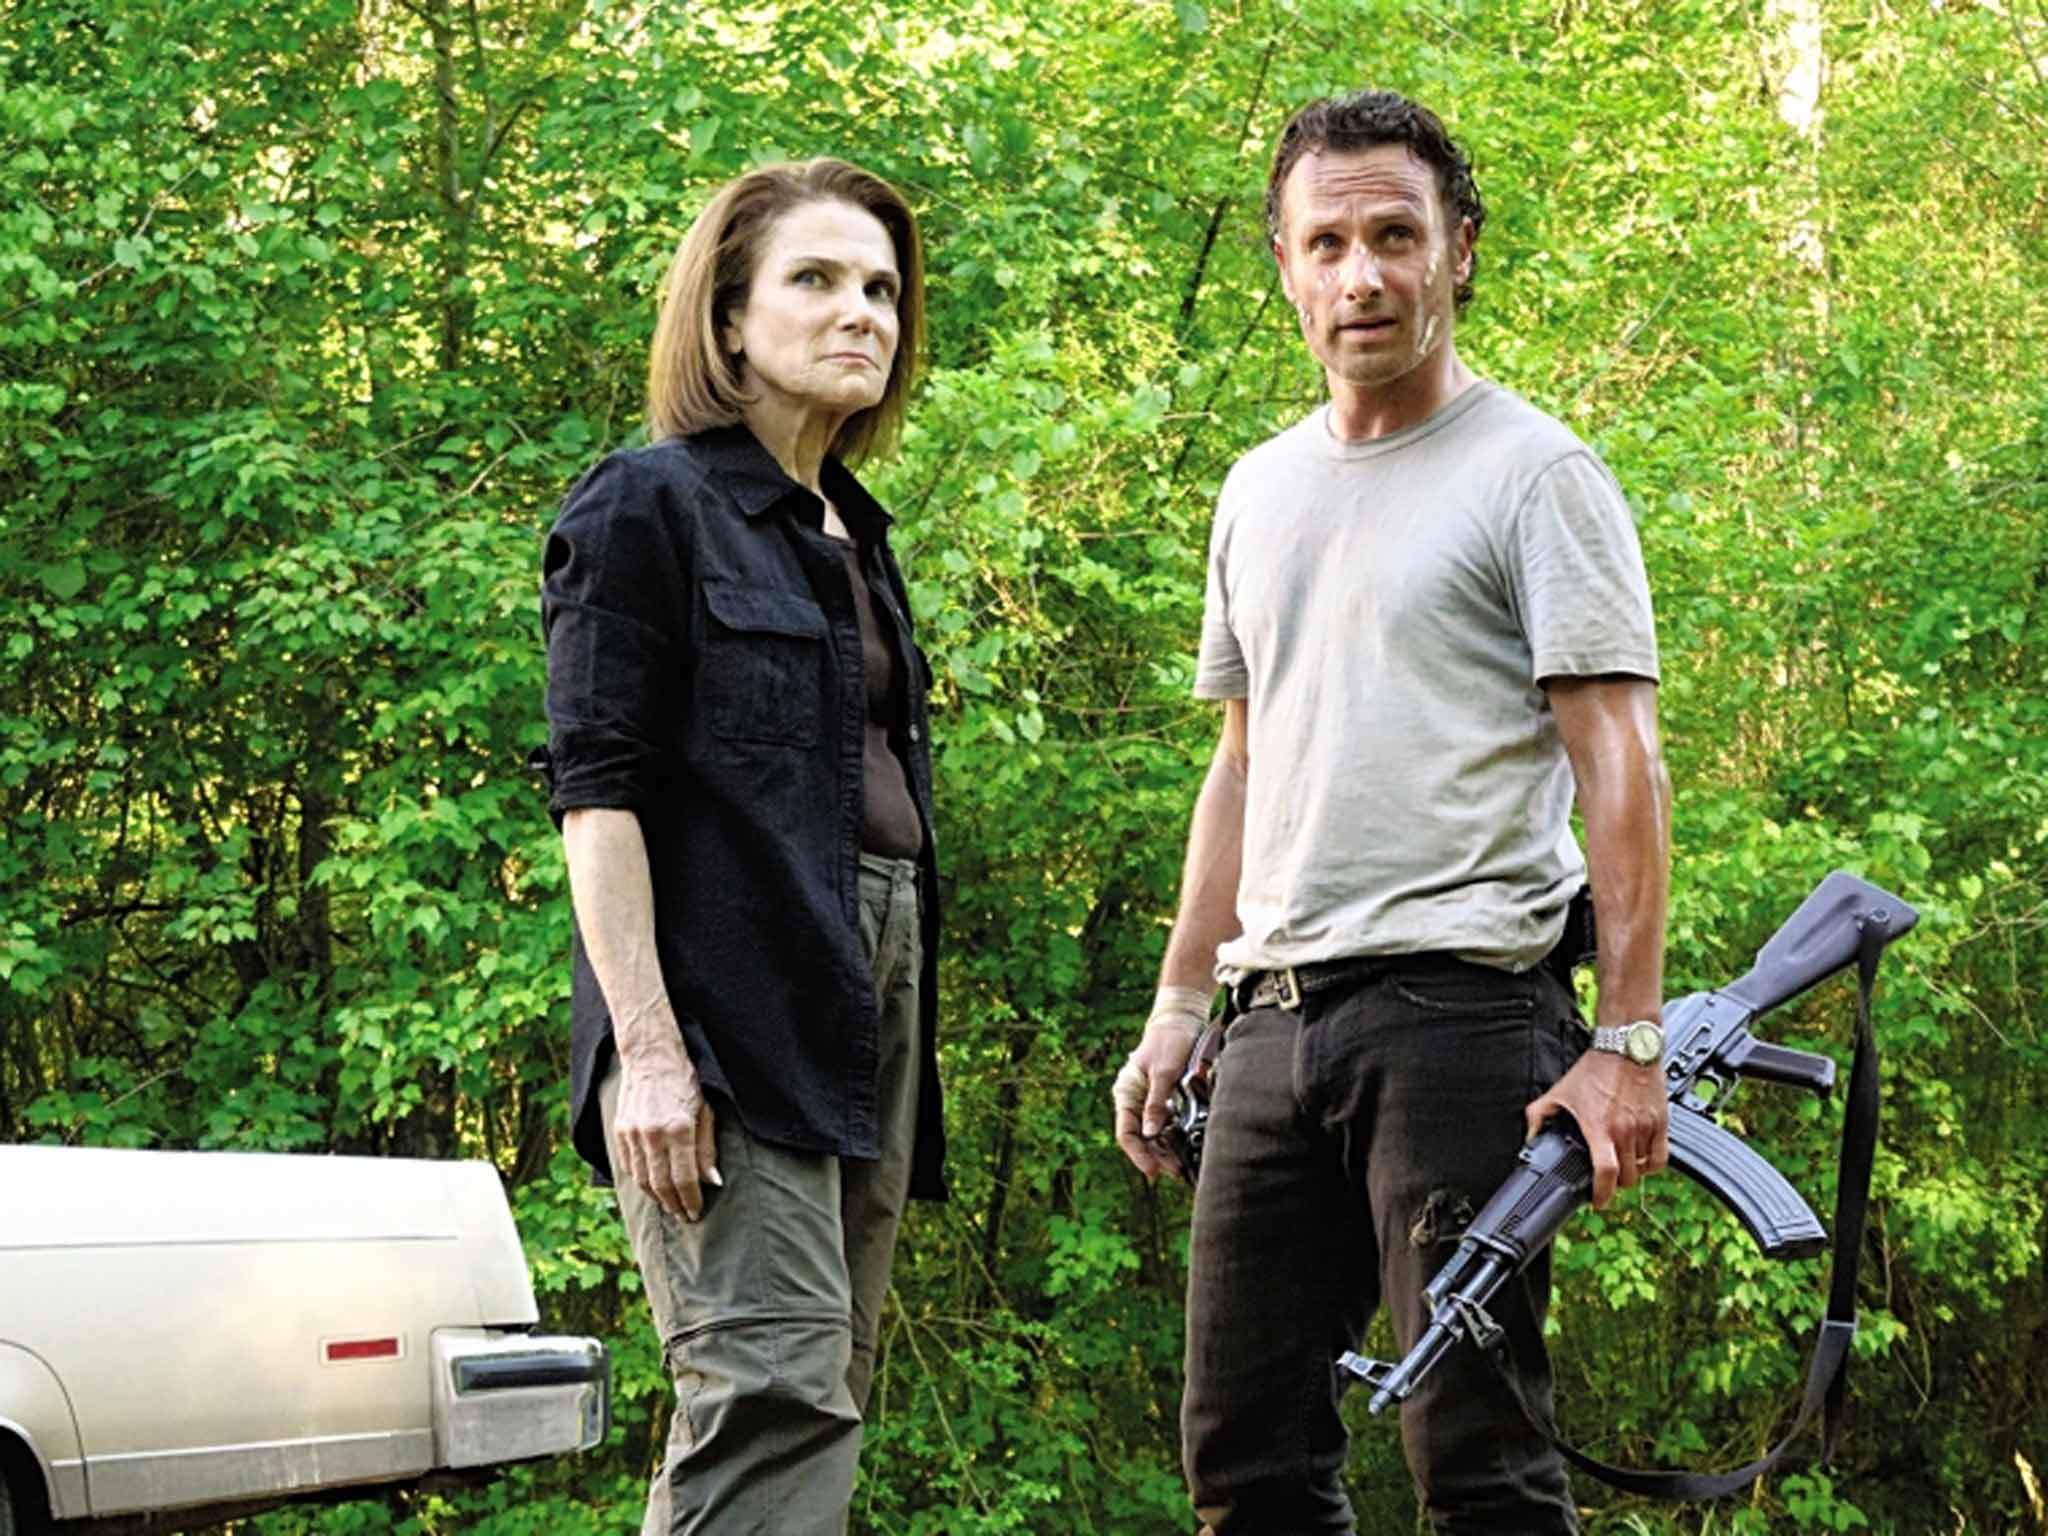 Out of firepower : Tovah Feldshuh and Andrew Lincoln as heroic Rick in 'The Walking Dead'